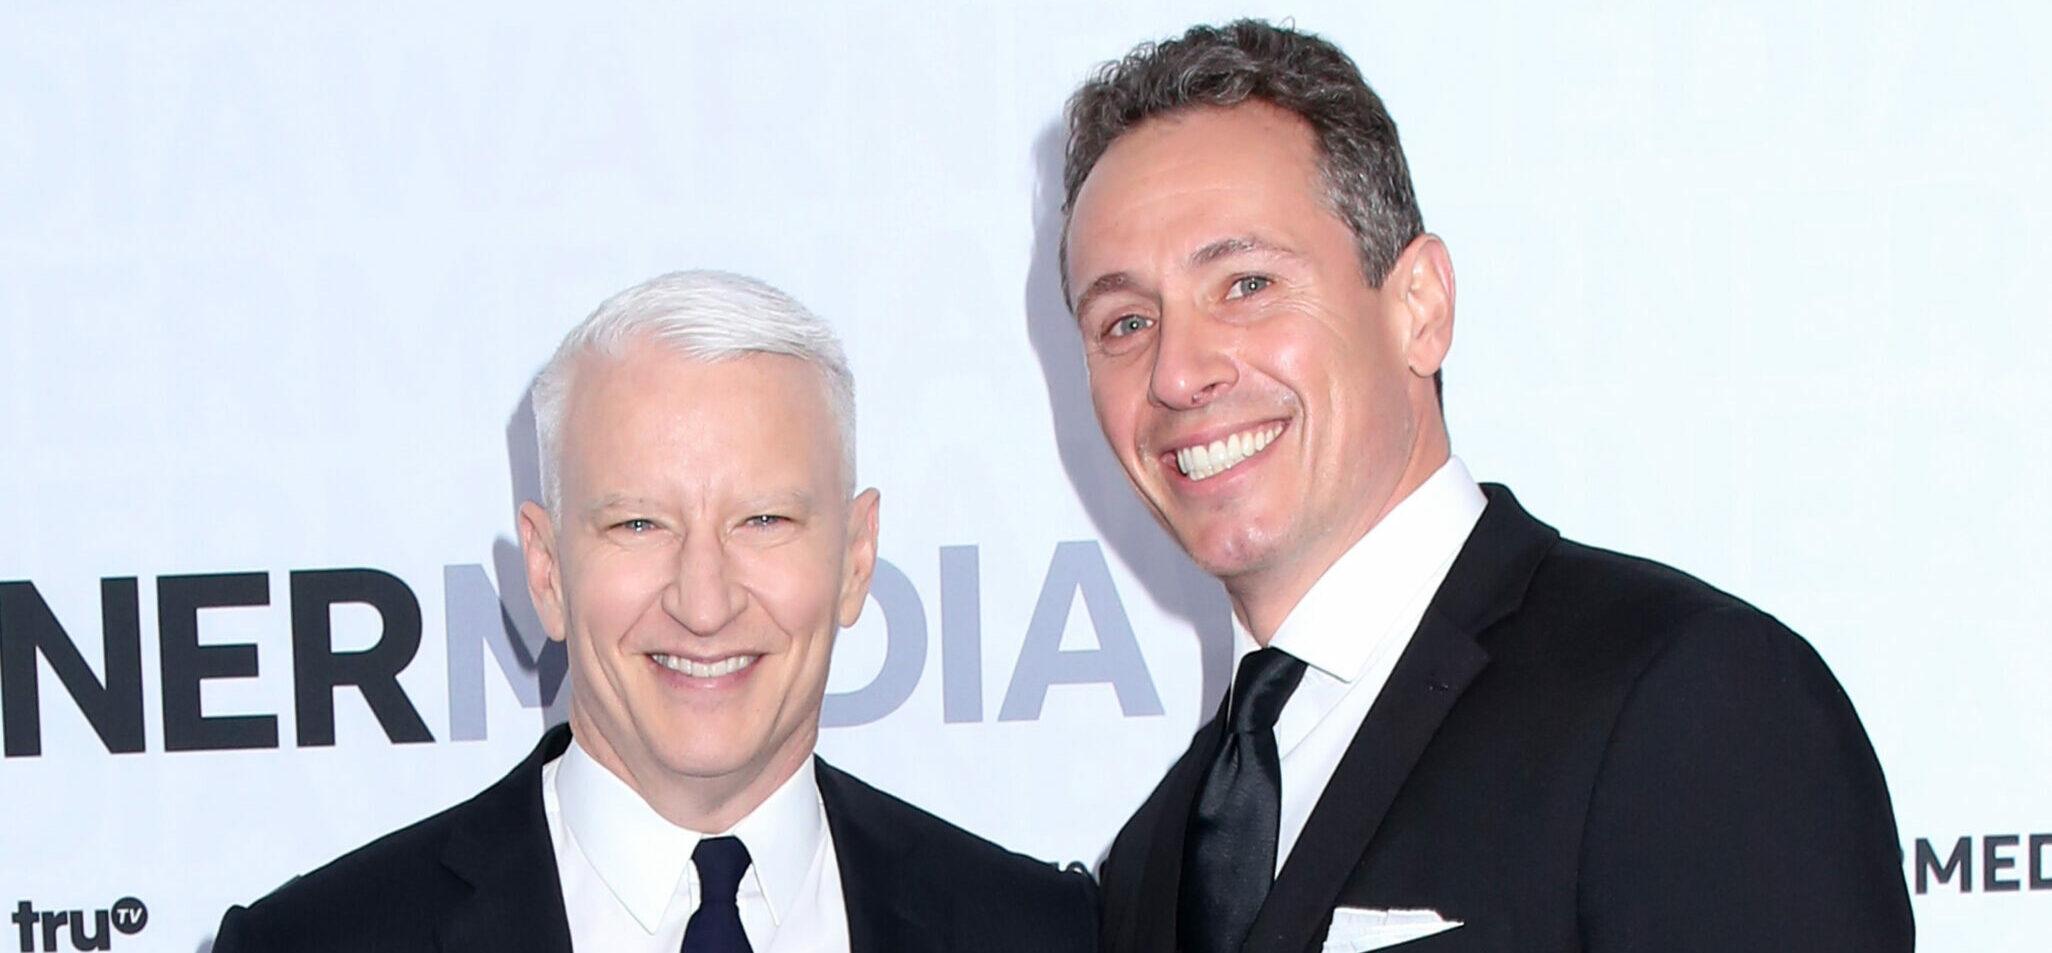 Chris Cuomo and Anderson Cooper